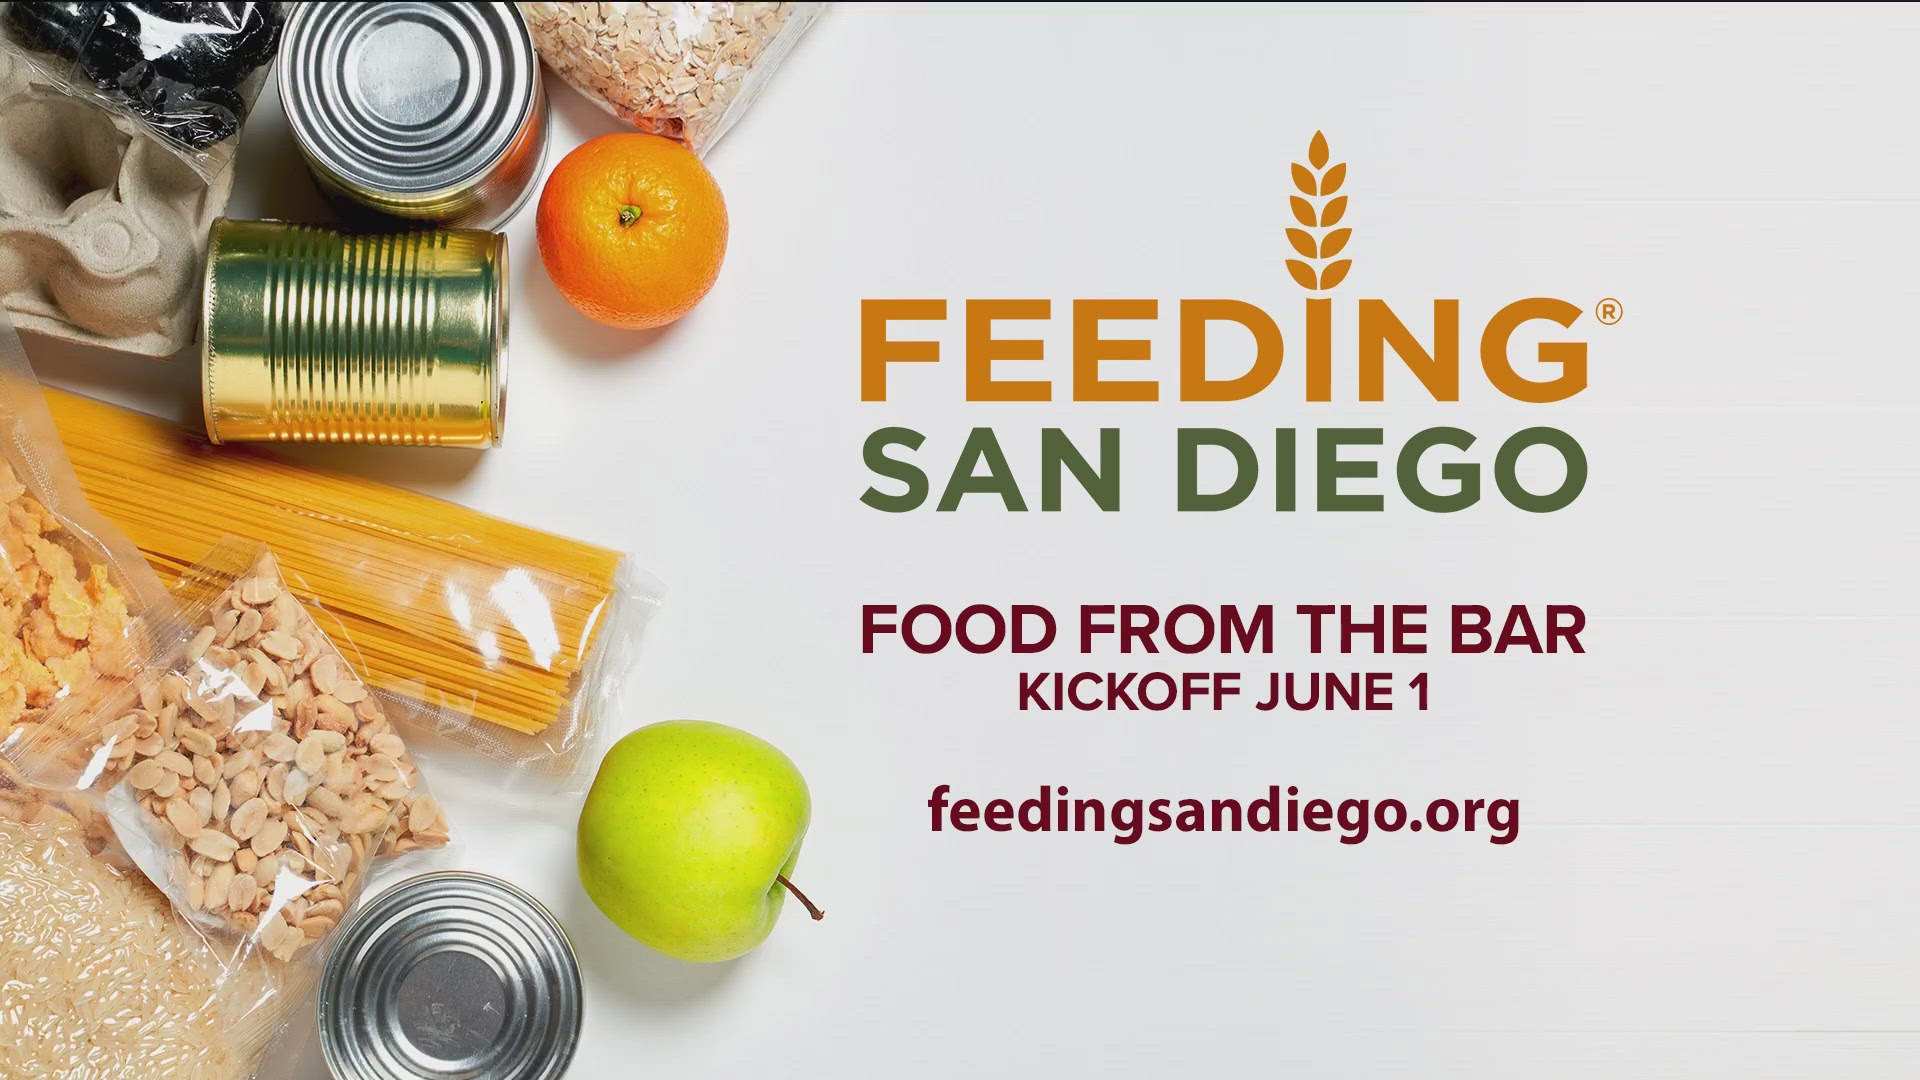 Brand new data from Feeding America shows there are more than 100,000 children in San Diego County who experience food insecurity.